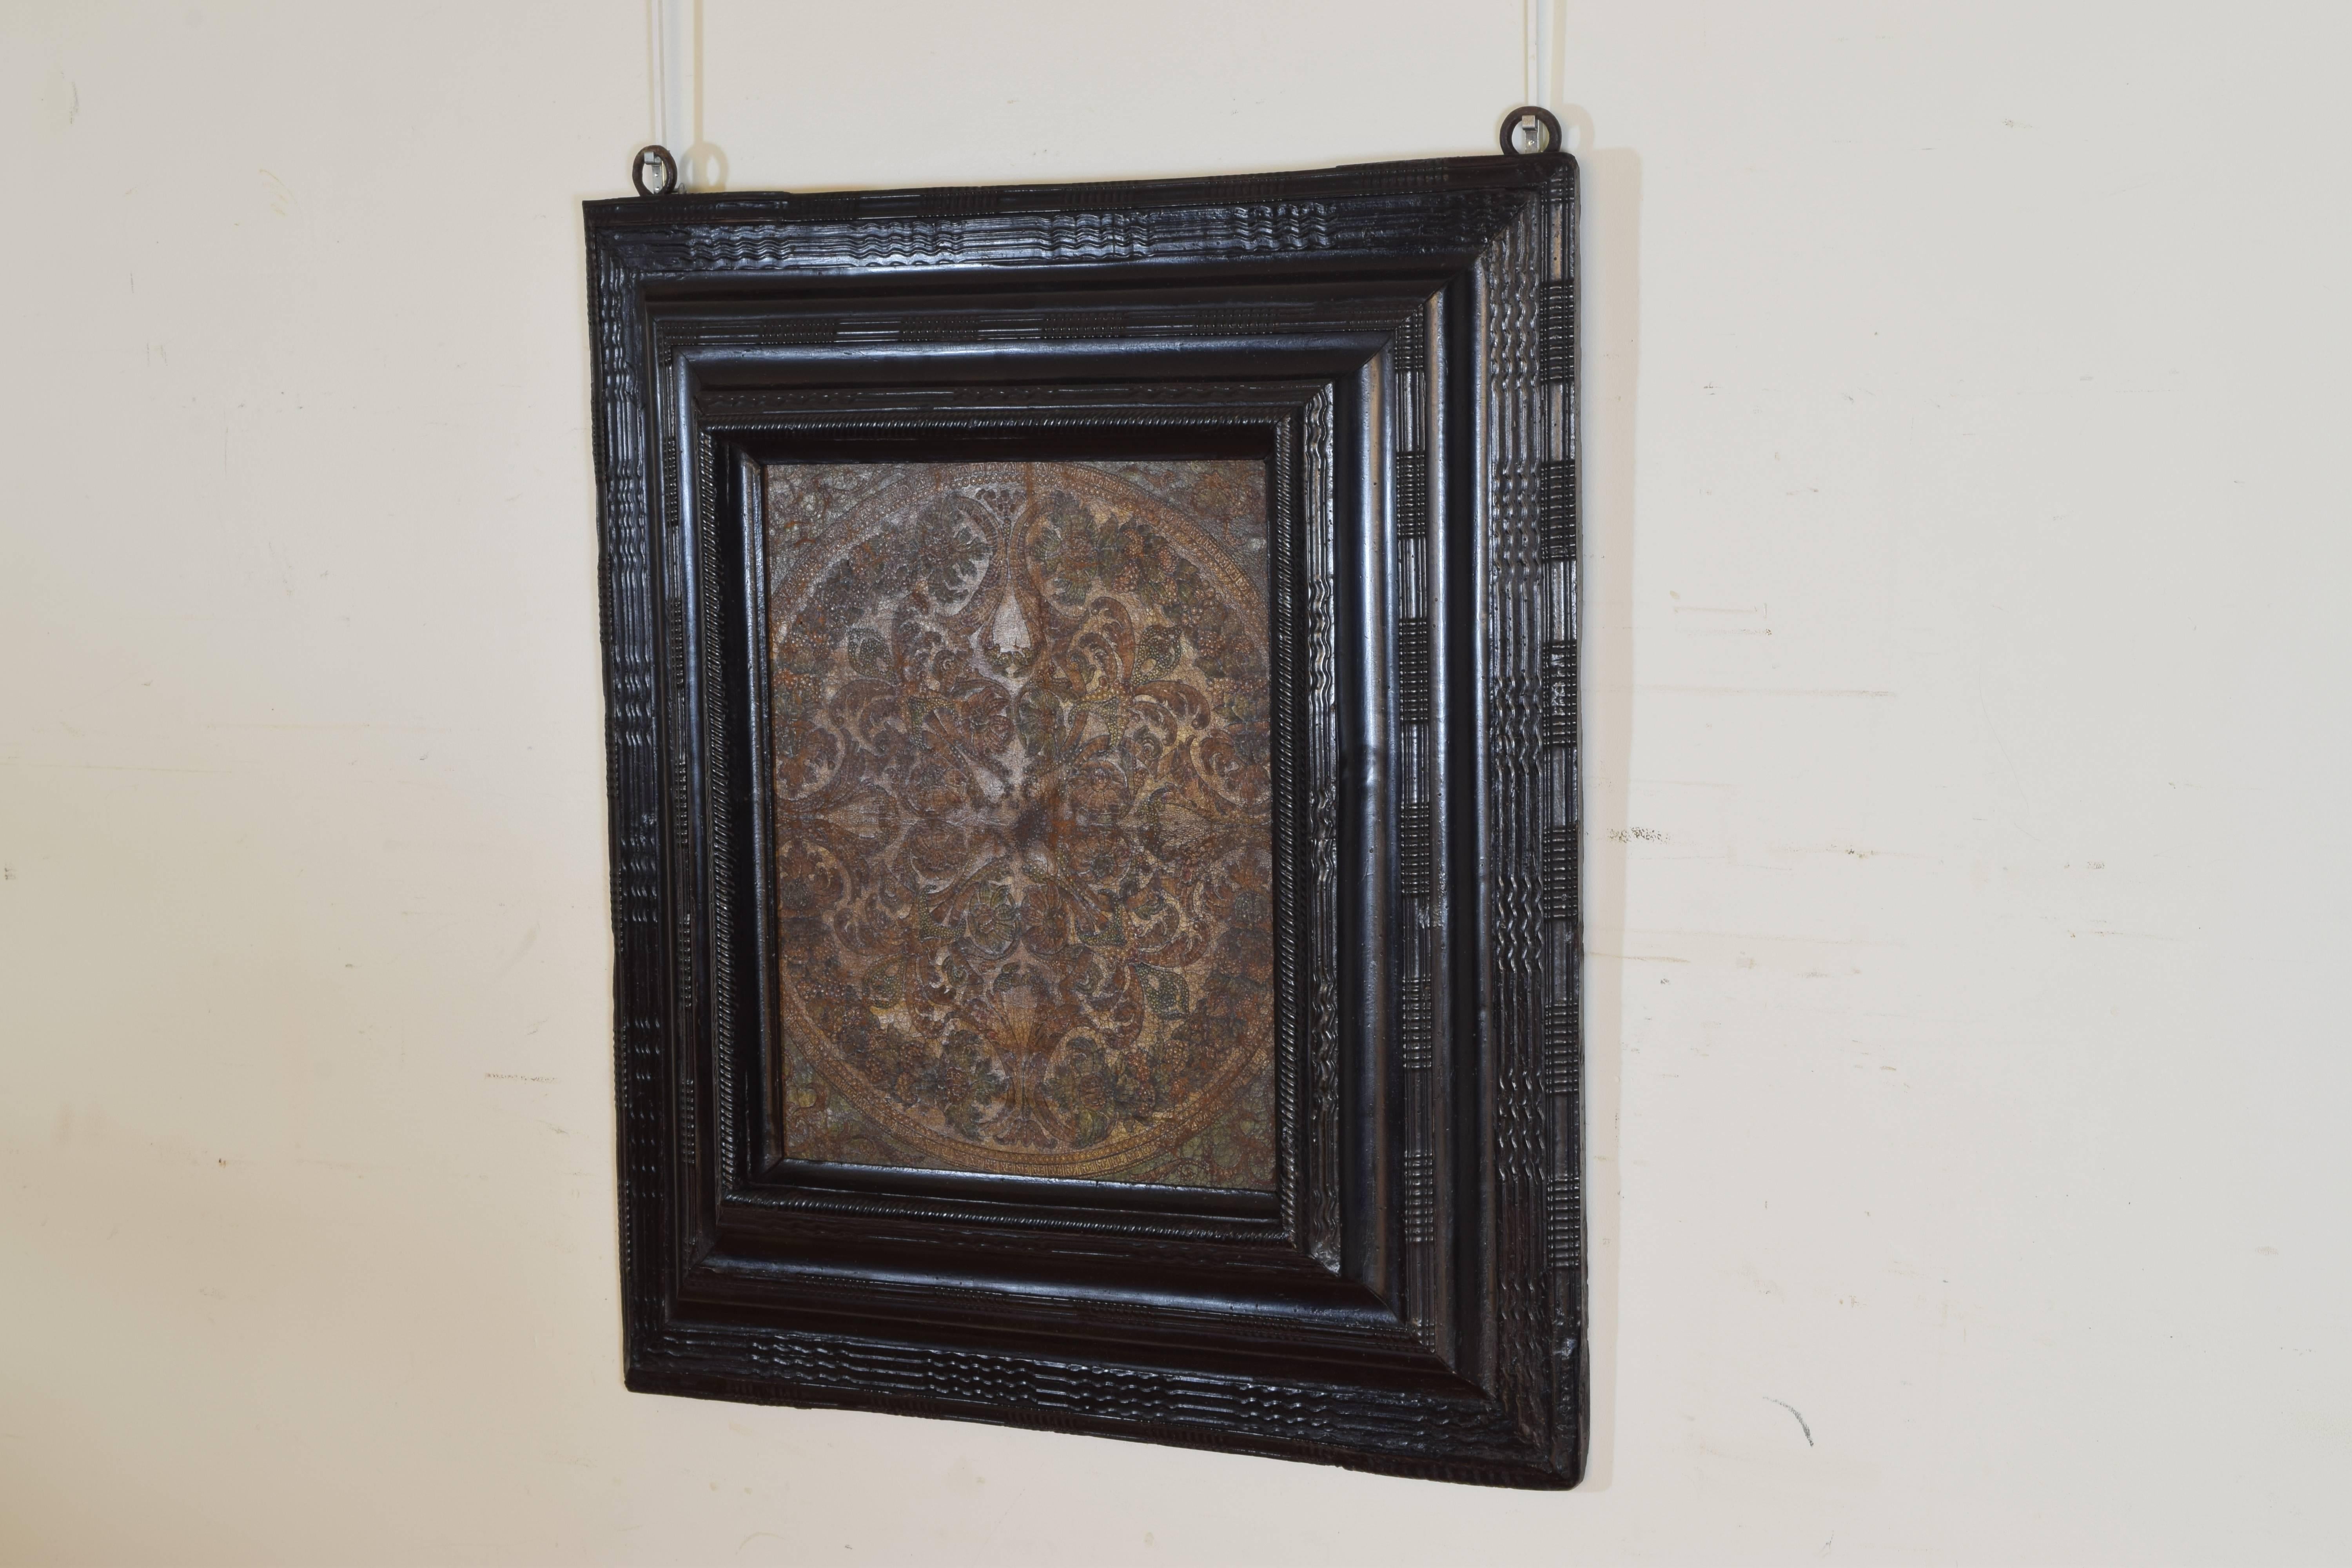 The Italian, 18th-19th century panel polychrome painted and tooled in a 17th century guilloche ebonized frame.